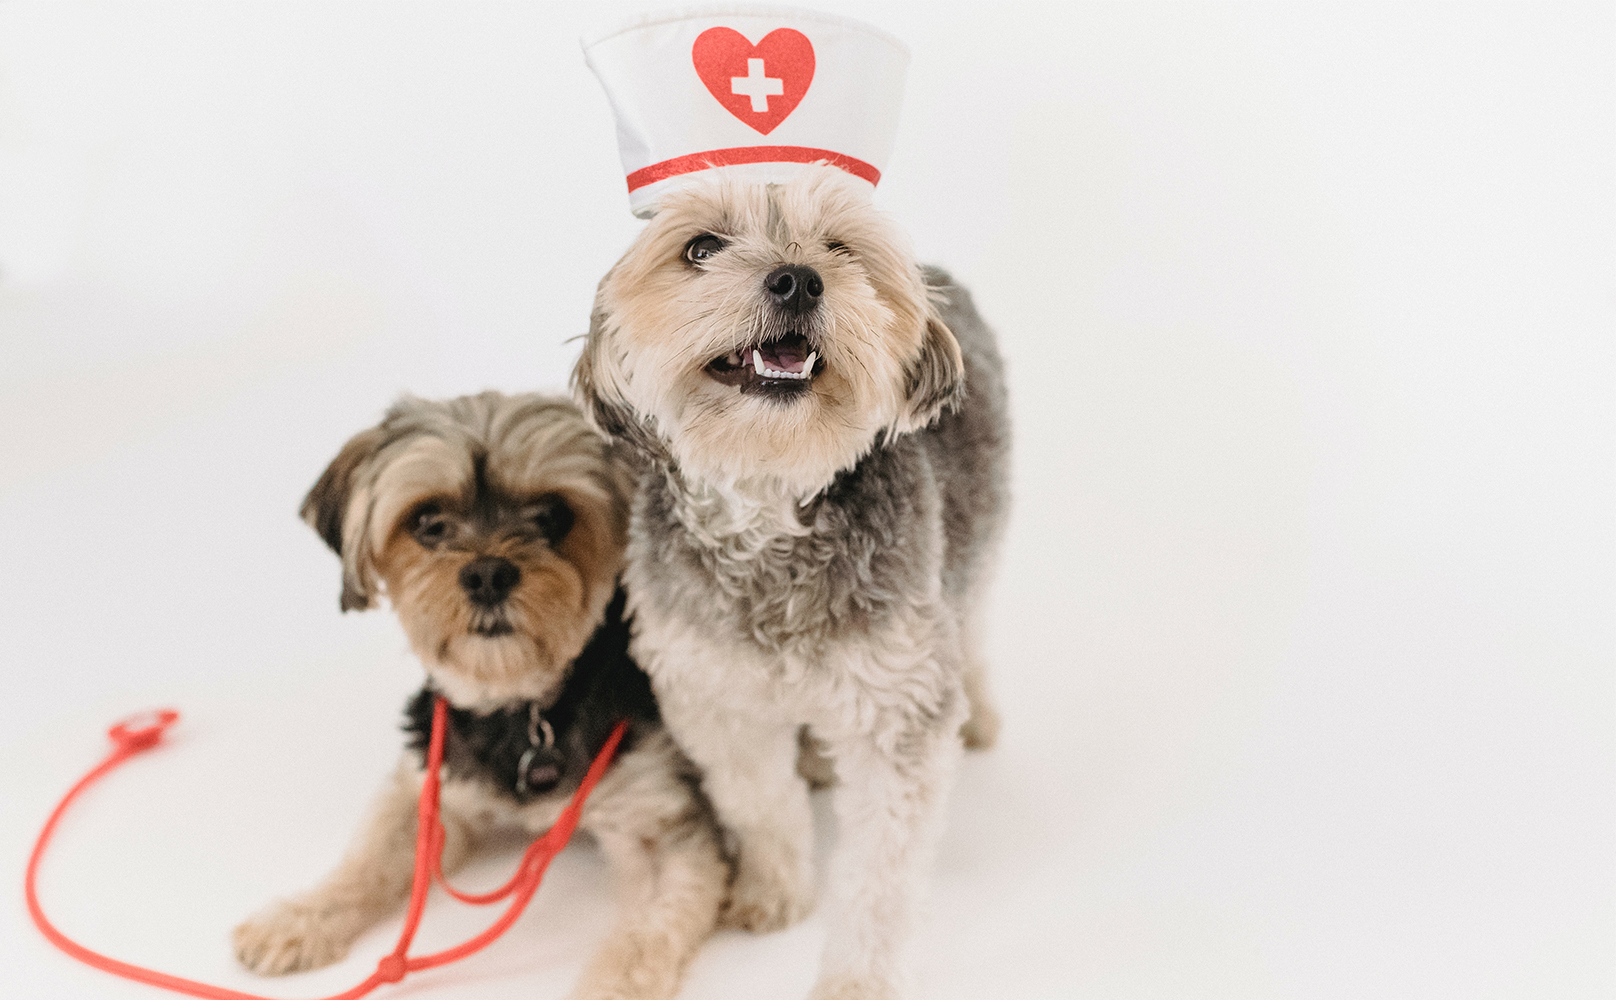 dog with nurse's hat and stethoscope